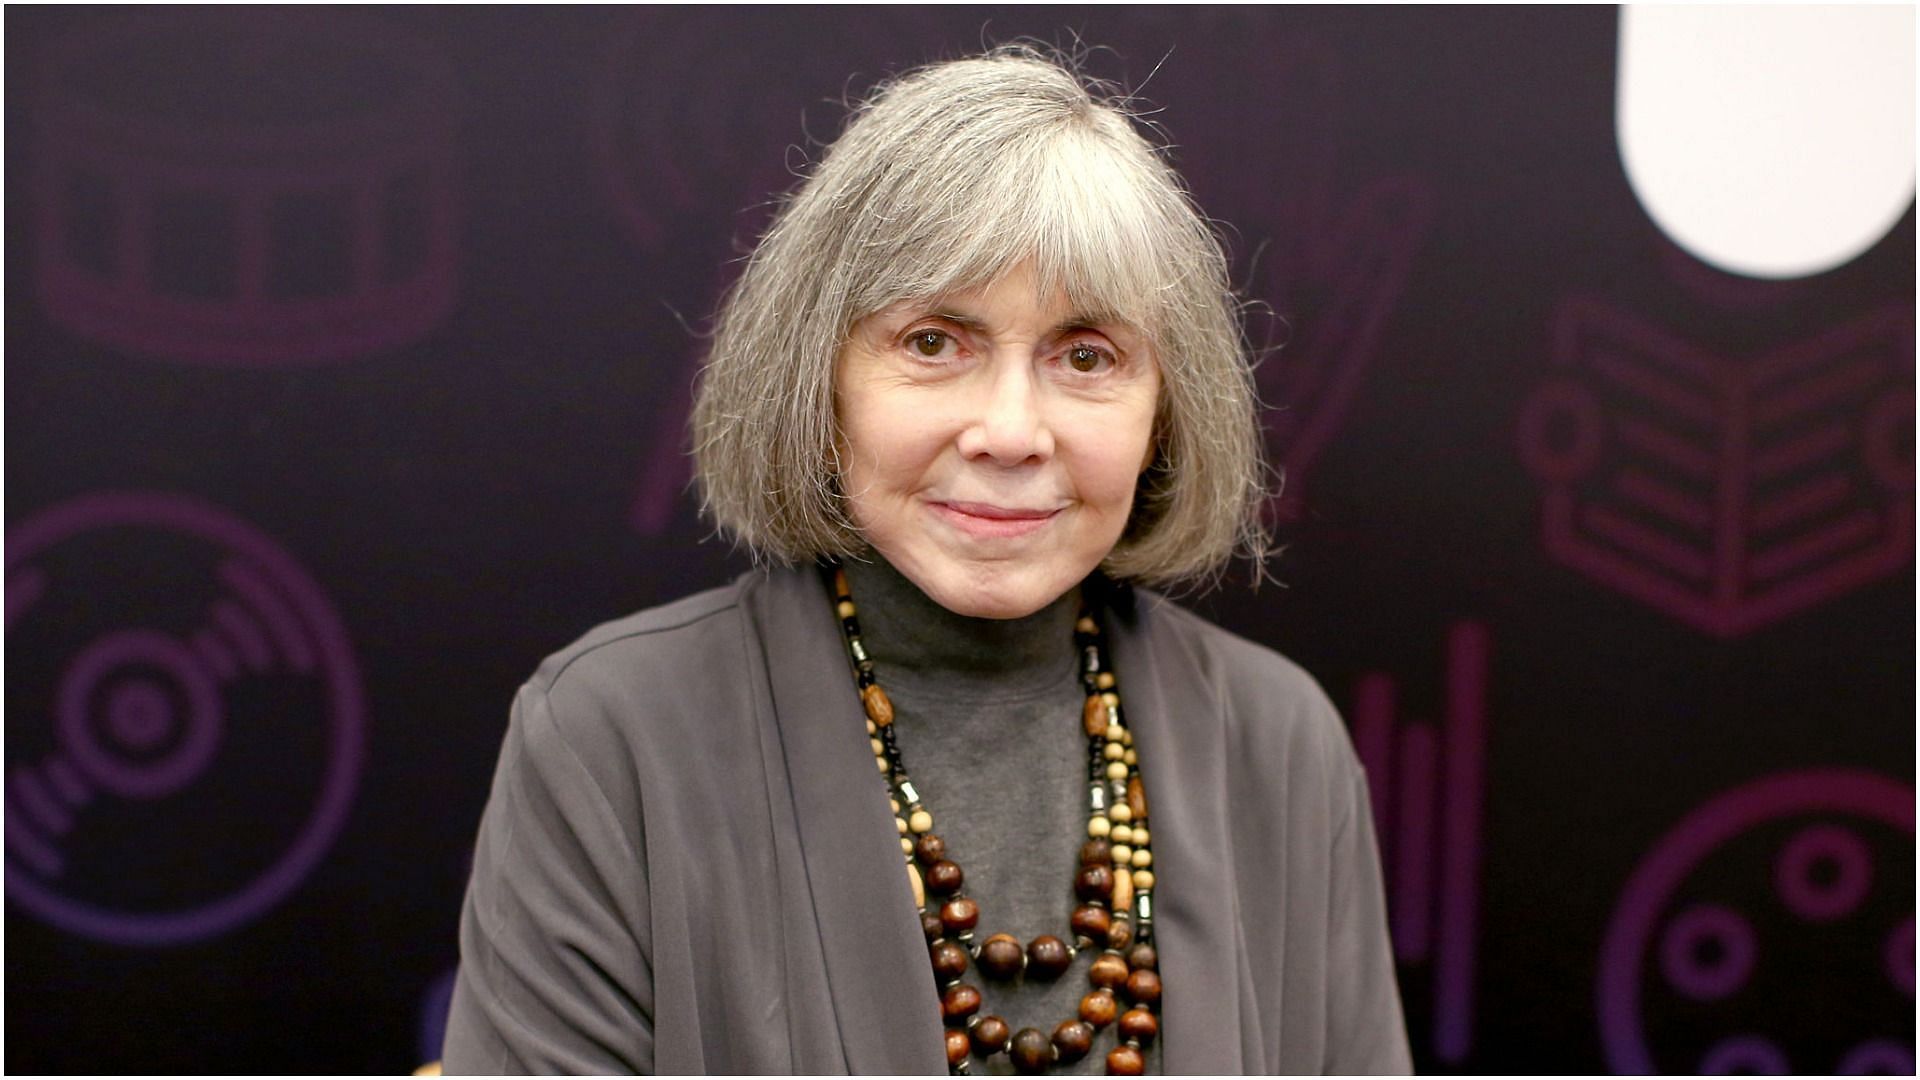 Anne Rice recently died at the age of 80 (Image by Joe Scarnici via Getty Images)